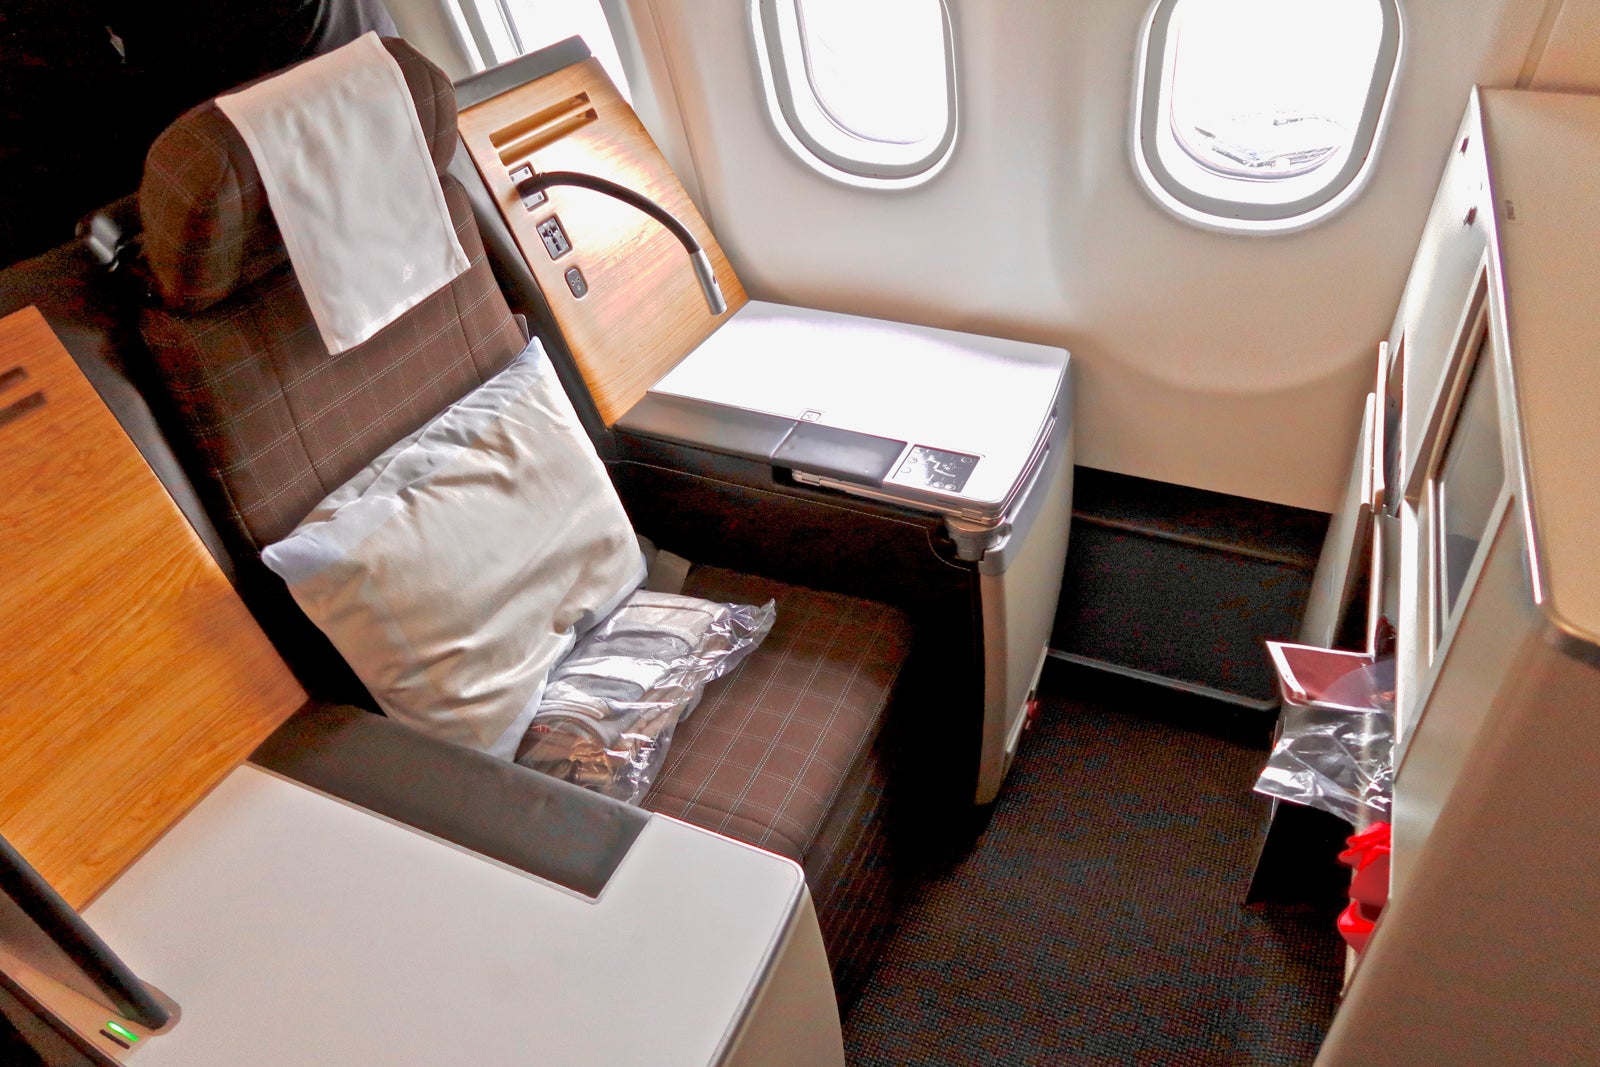 Swiss airlines business class on a Boeing 767